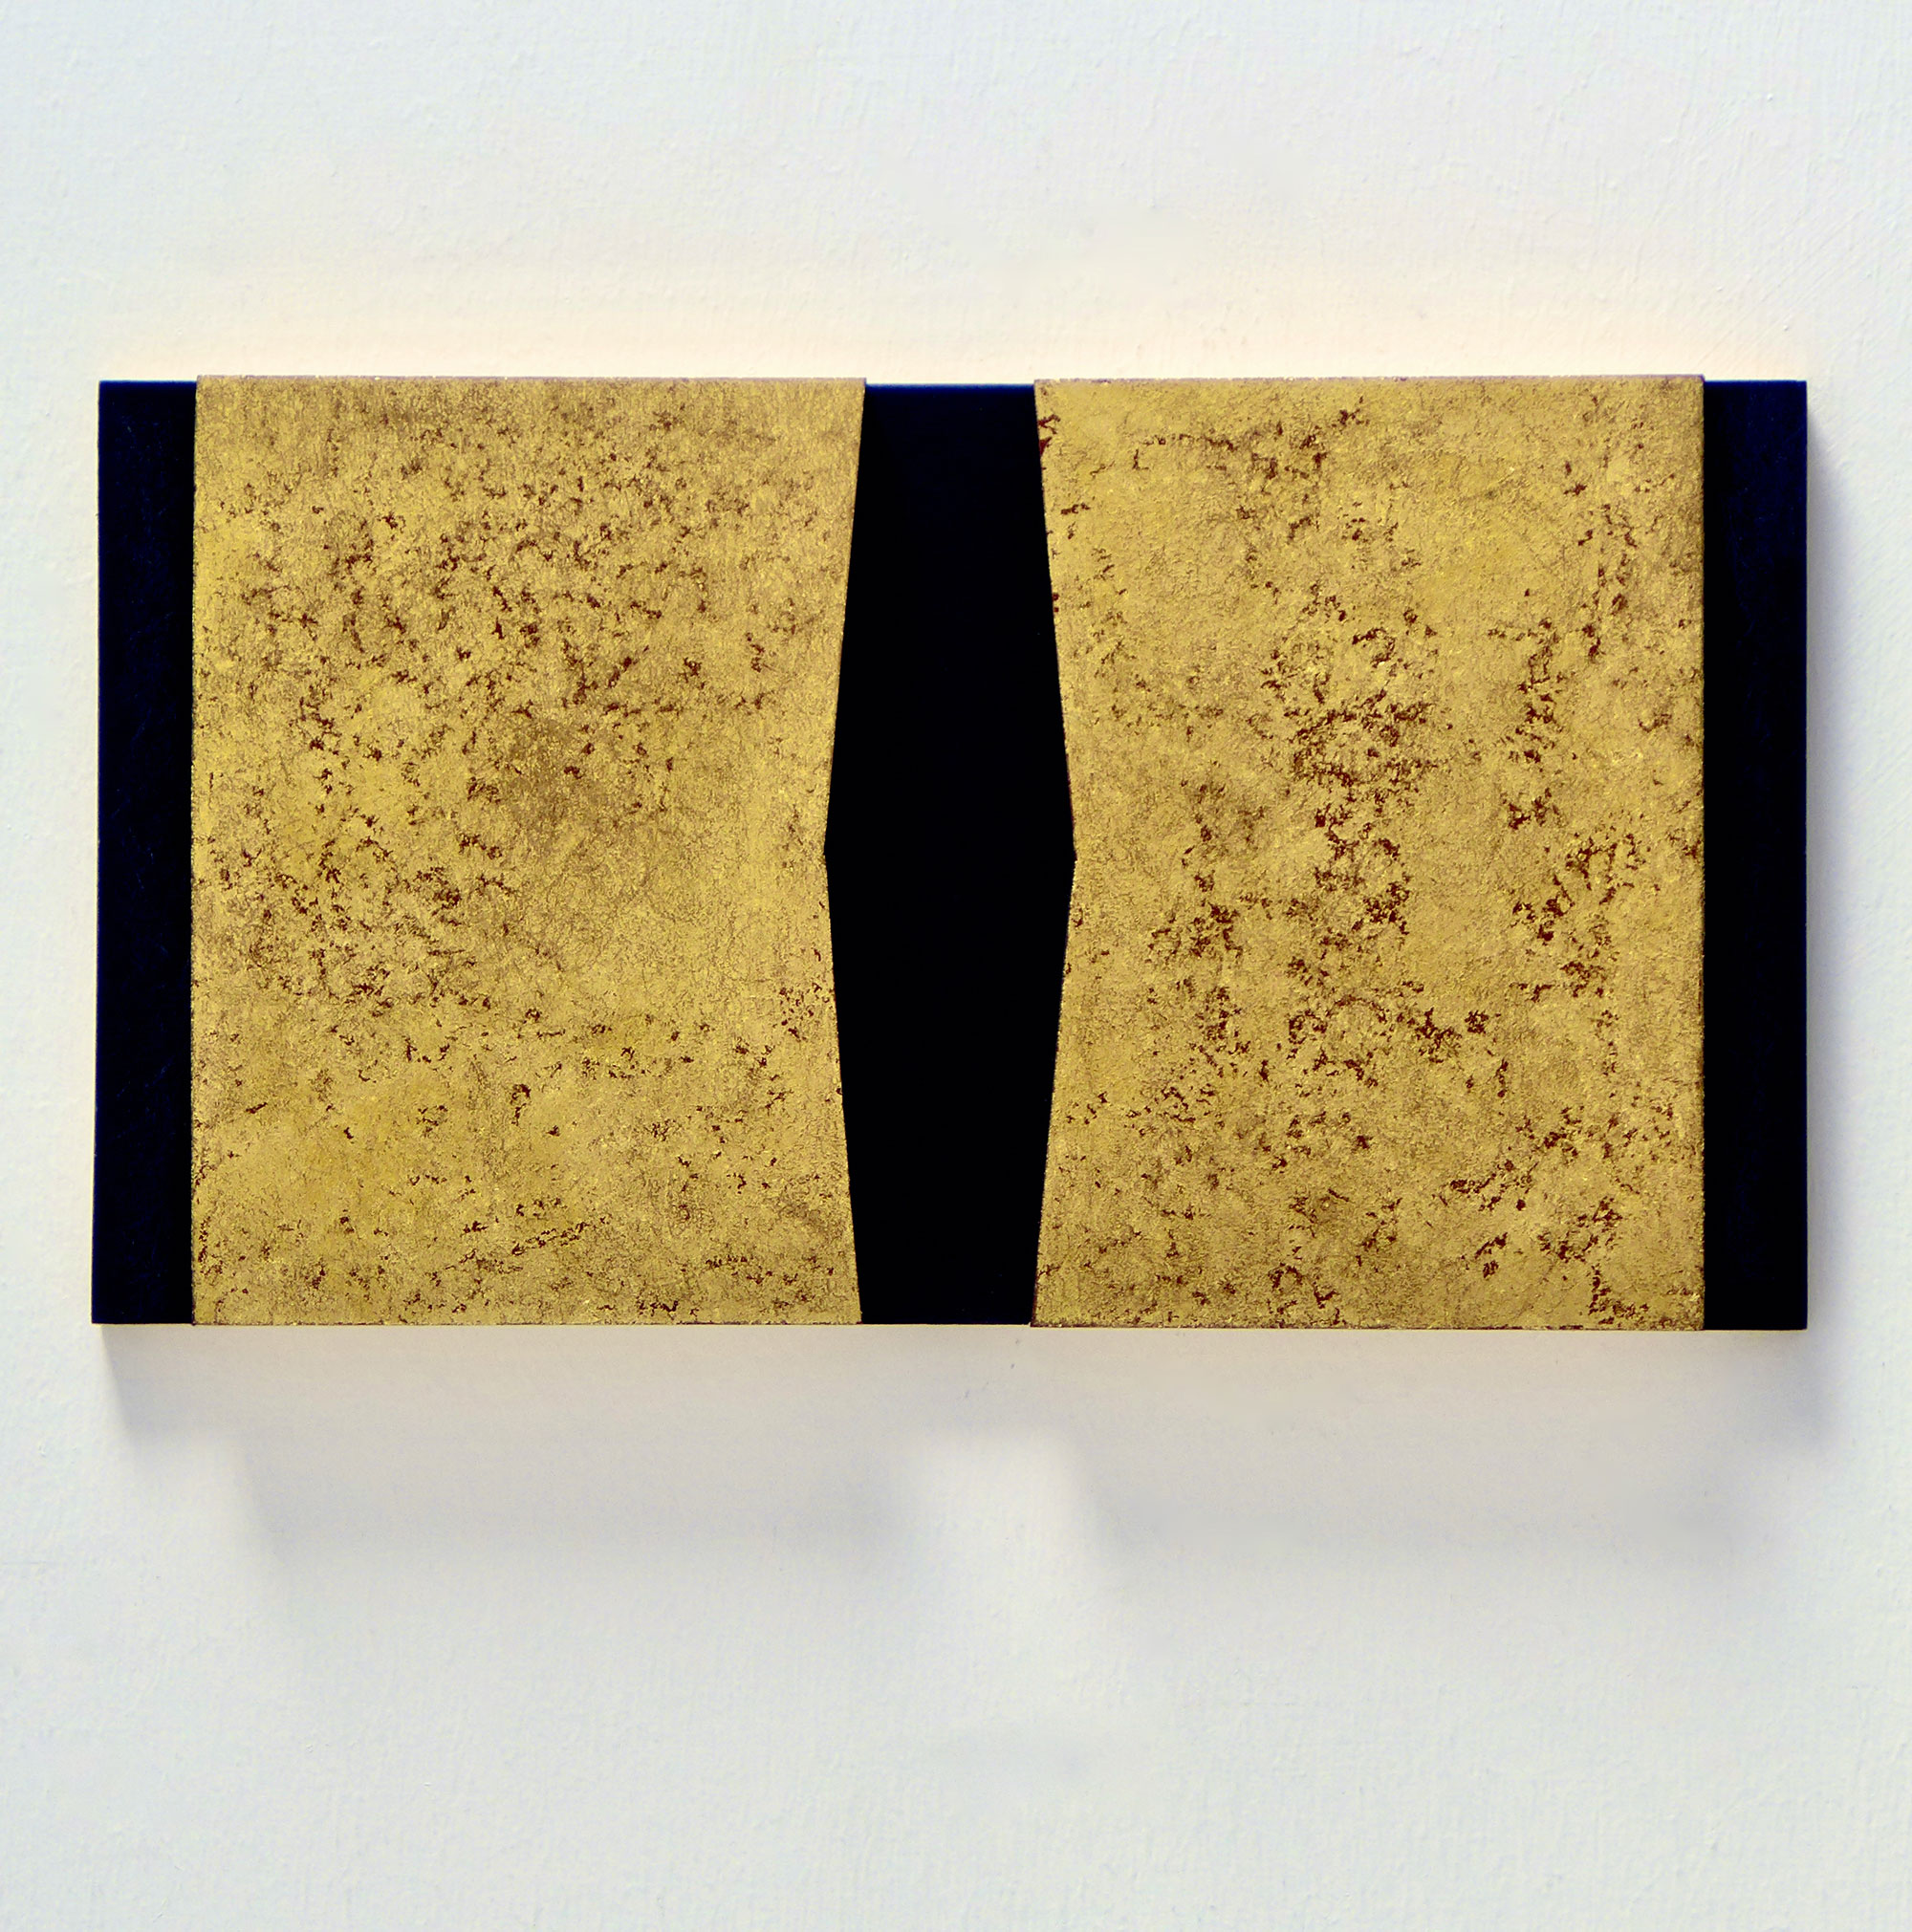 Kenneth Dingwall, Passage Series (III), 2012, casein, graphite and gold leaf on wood, 17.5cm x 30.5cm x 2cm